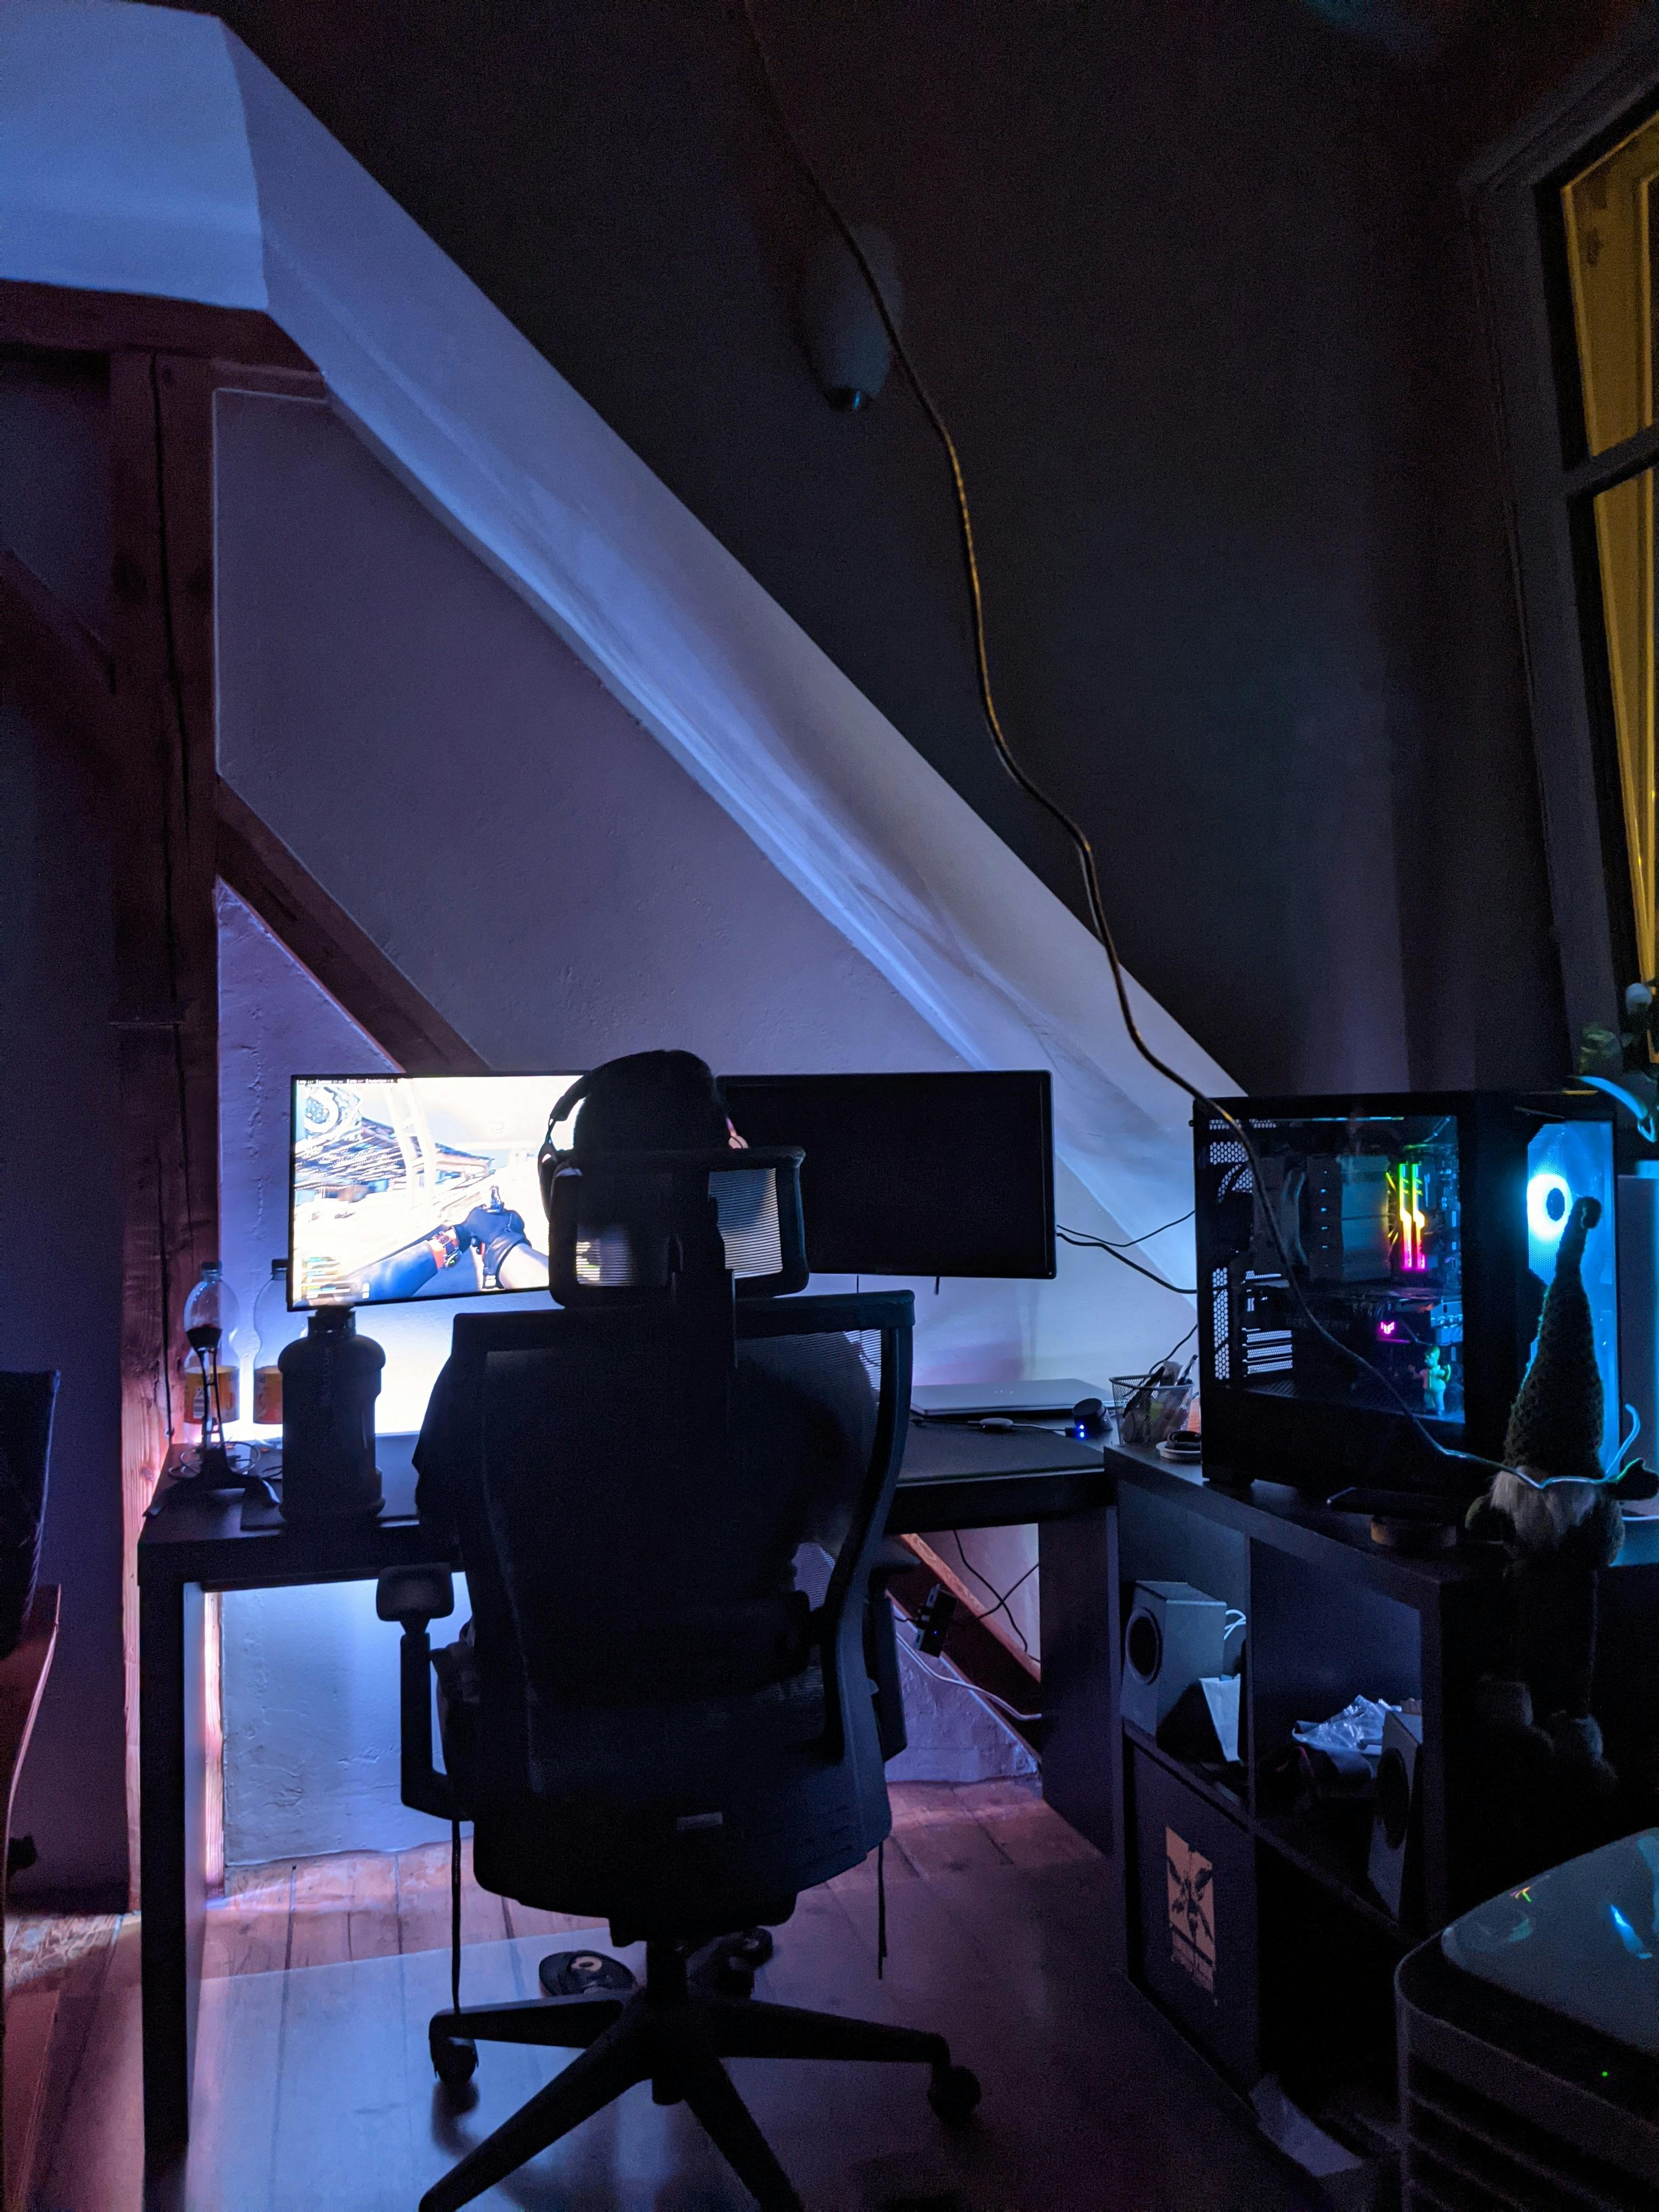 Someone playing a video game in a gaming room | Source: Pexels